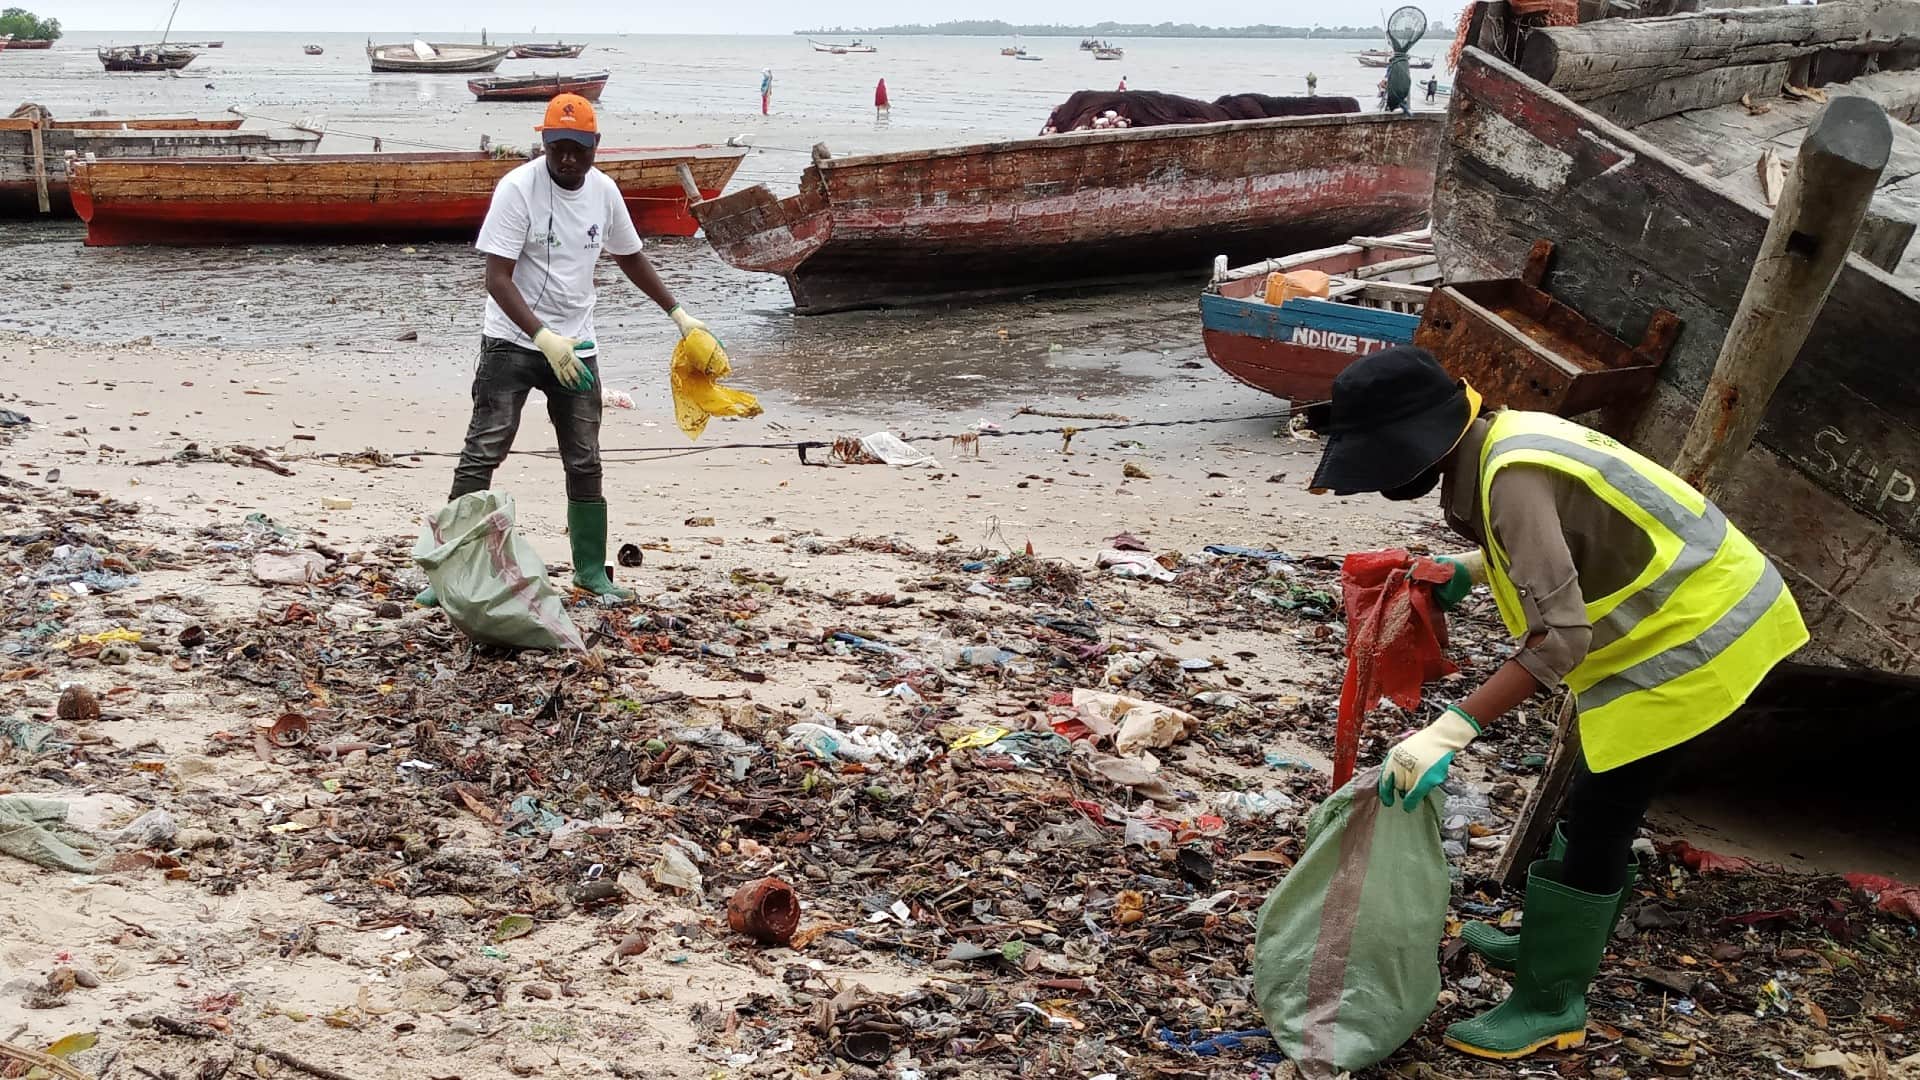 Two volunteers stand next to a pile of plastic on the beach in Mkokotoni, on the coast of Zanzibar. Photo: Supplied